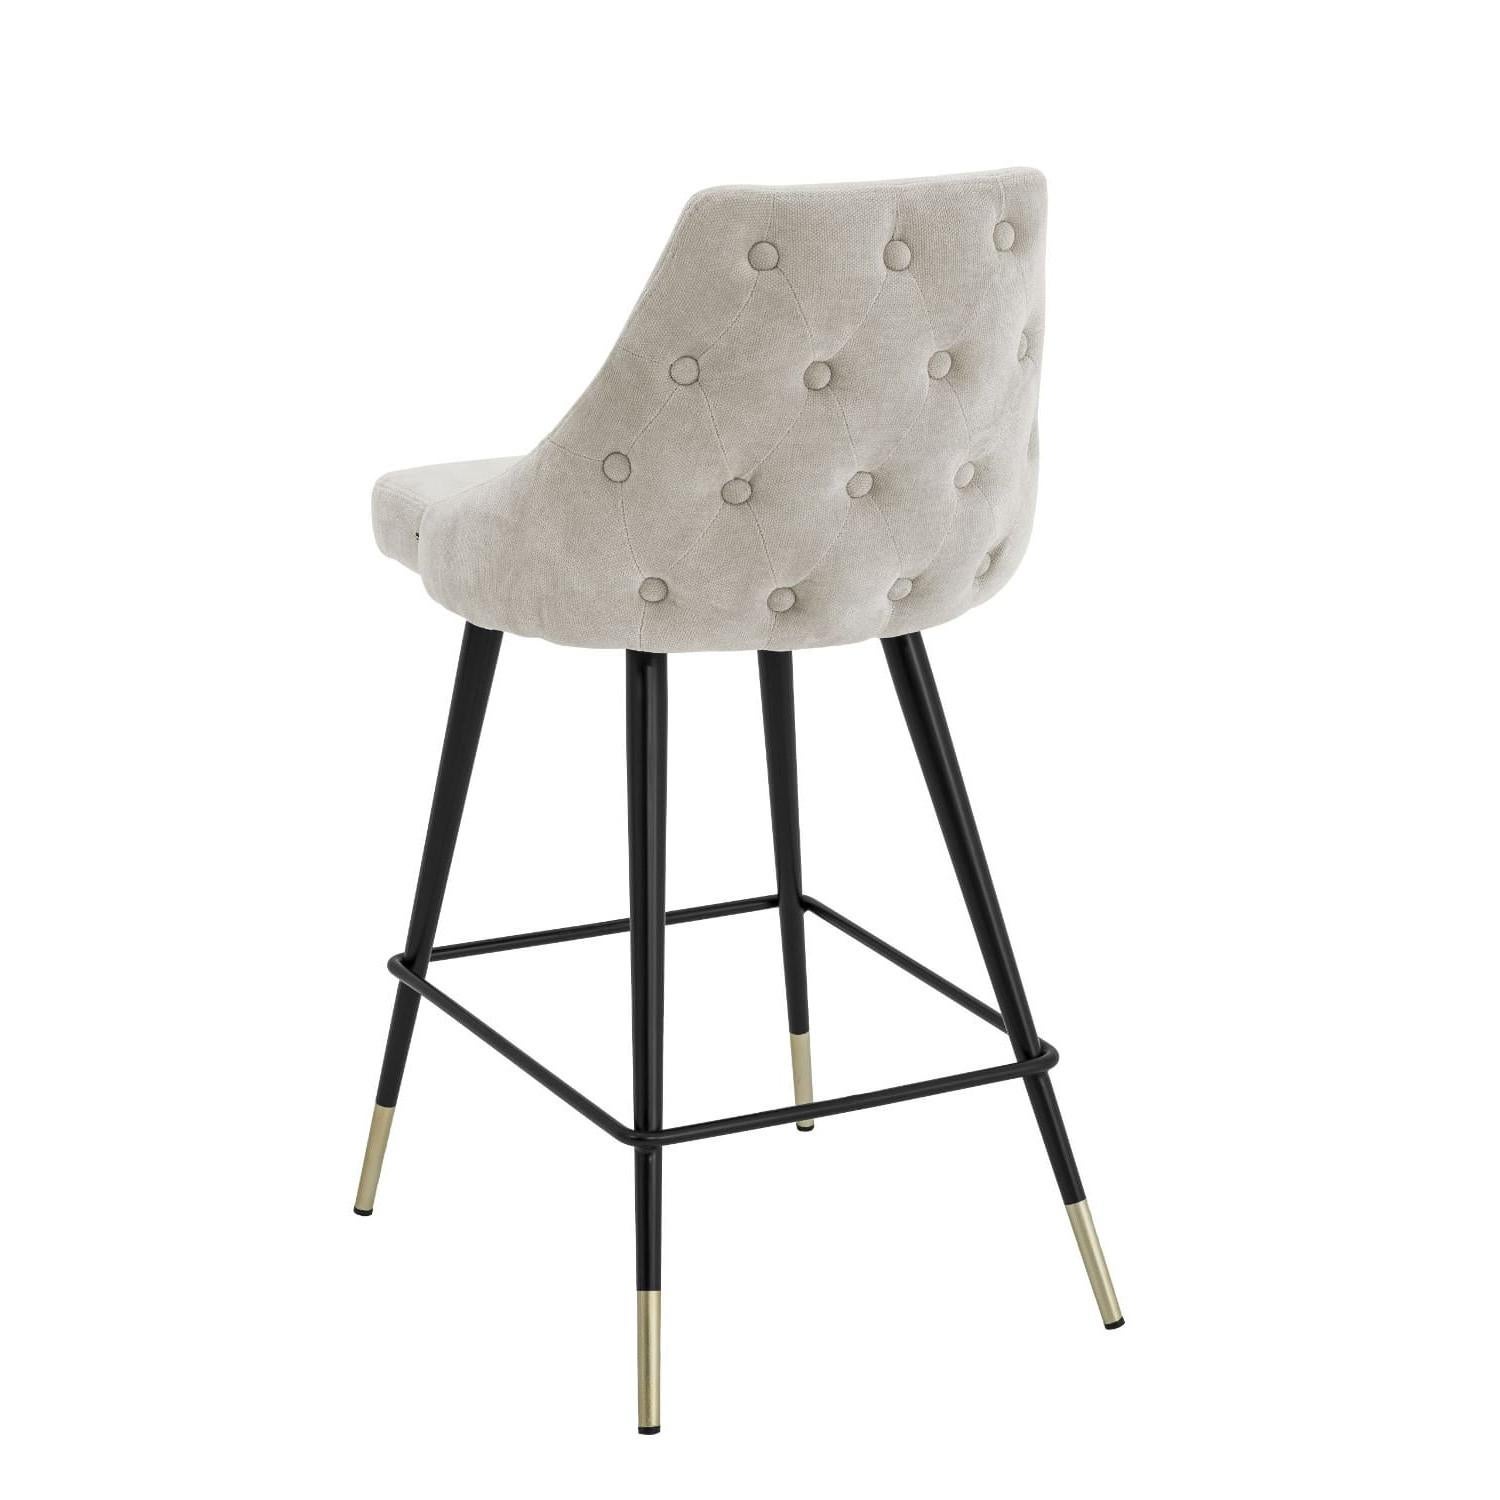 Counter stool in light grey fabric black metal feet and brass finishes.